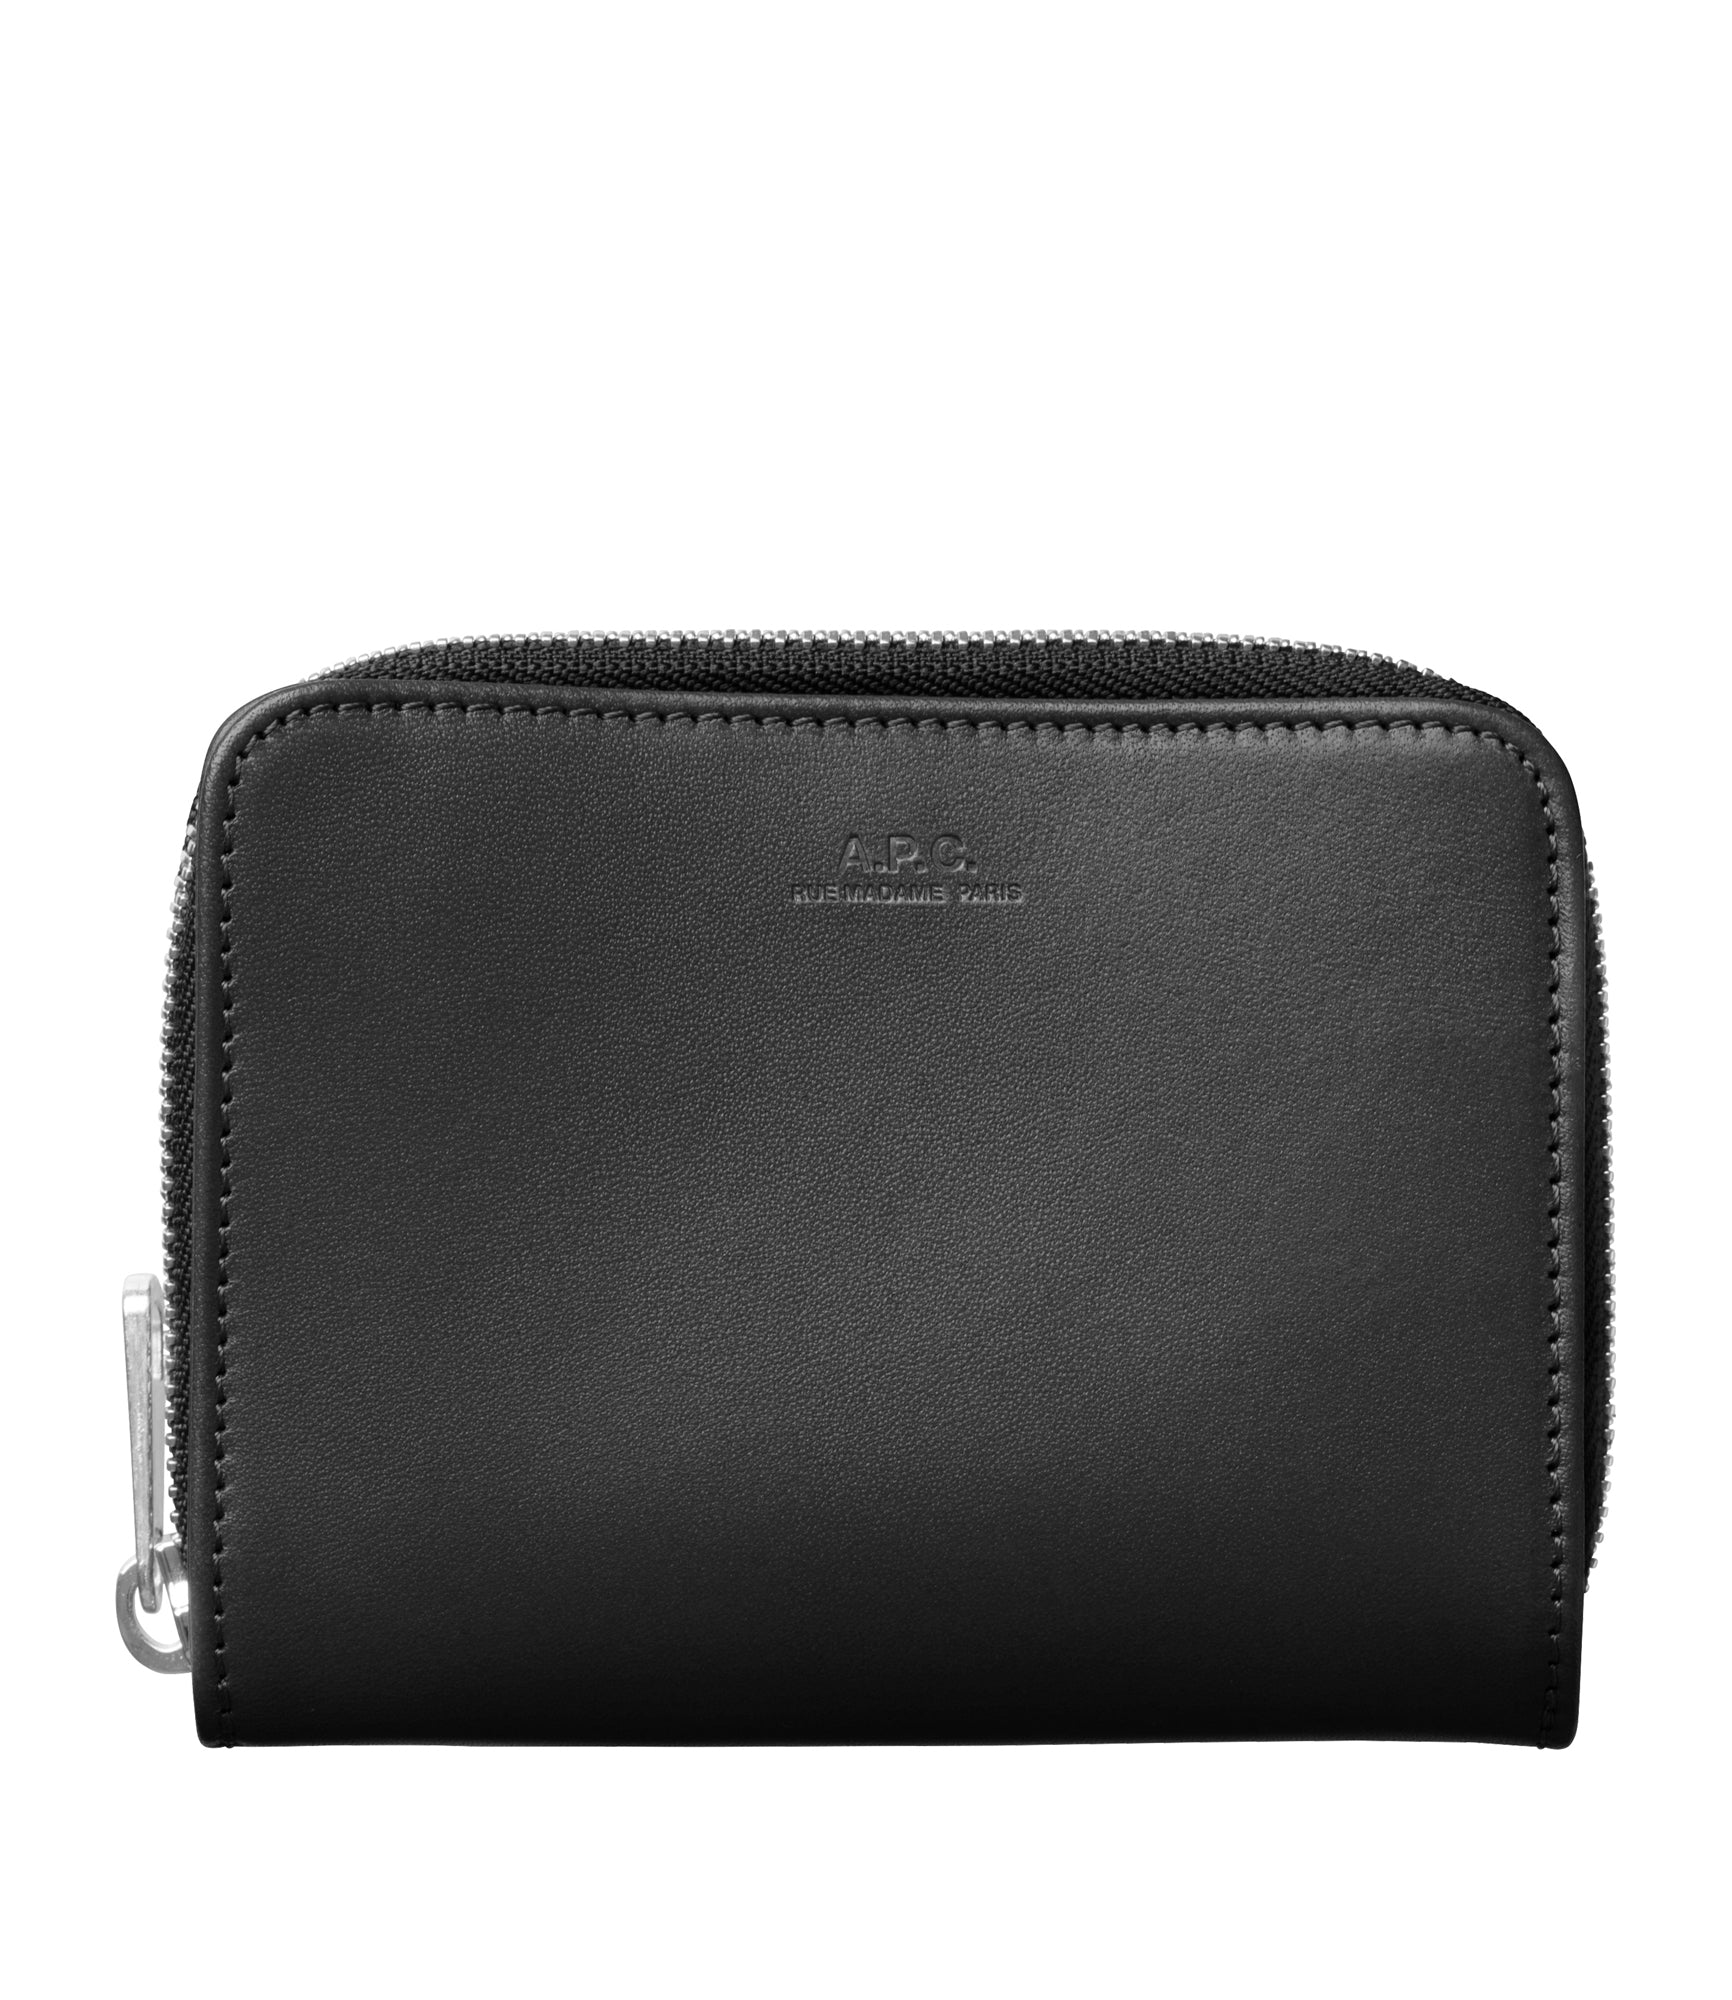 Emmanuel compact wallet - Spanish Leather - A.P.C. Accessories